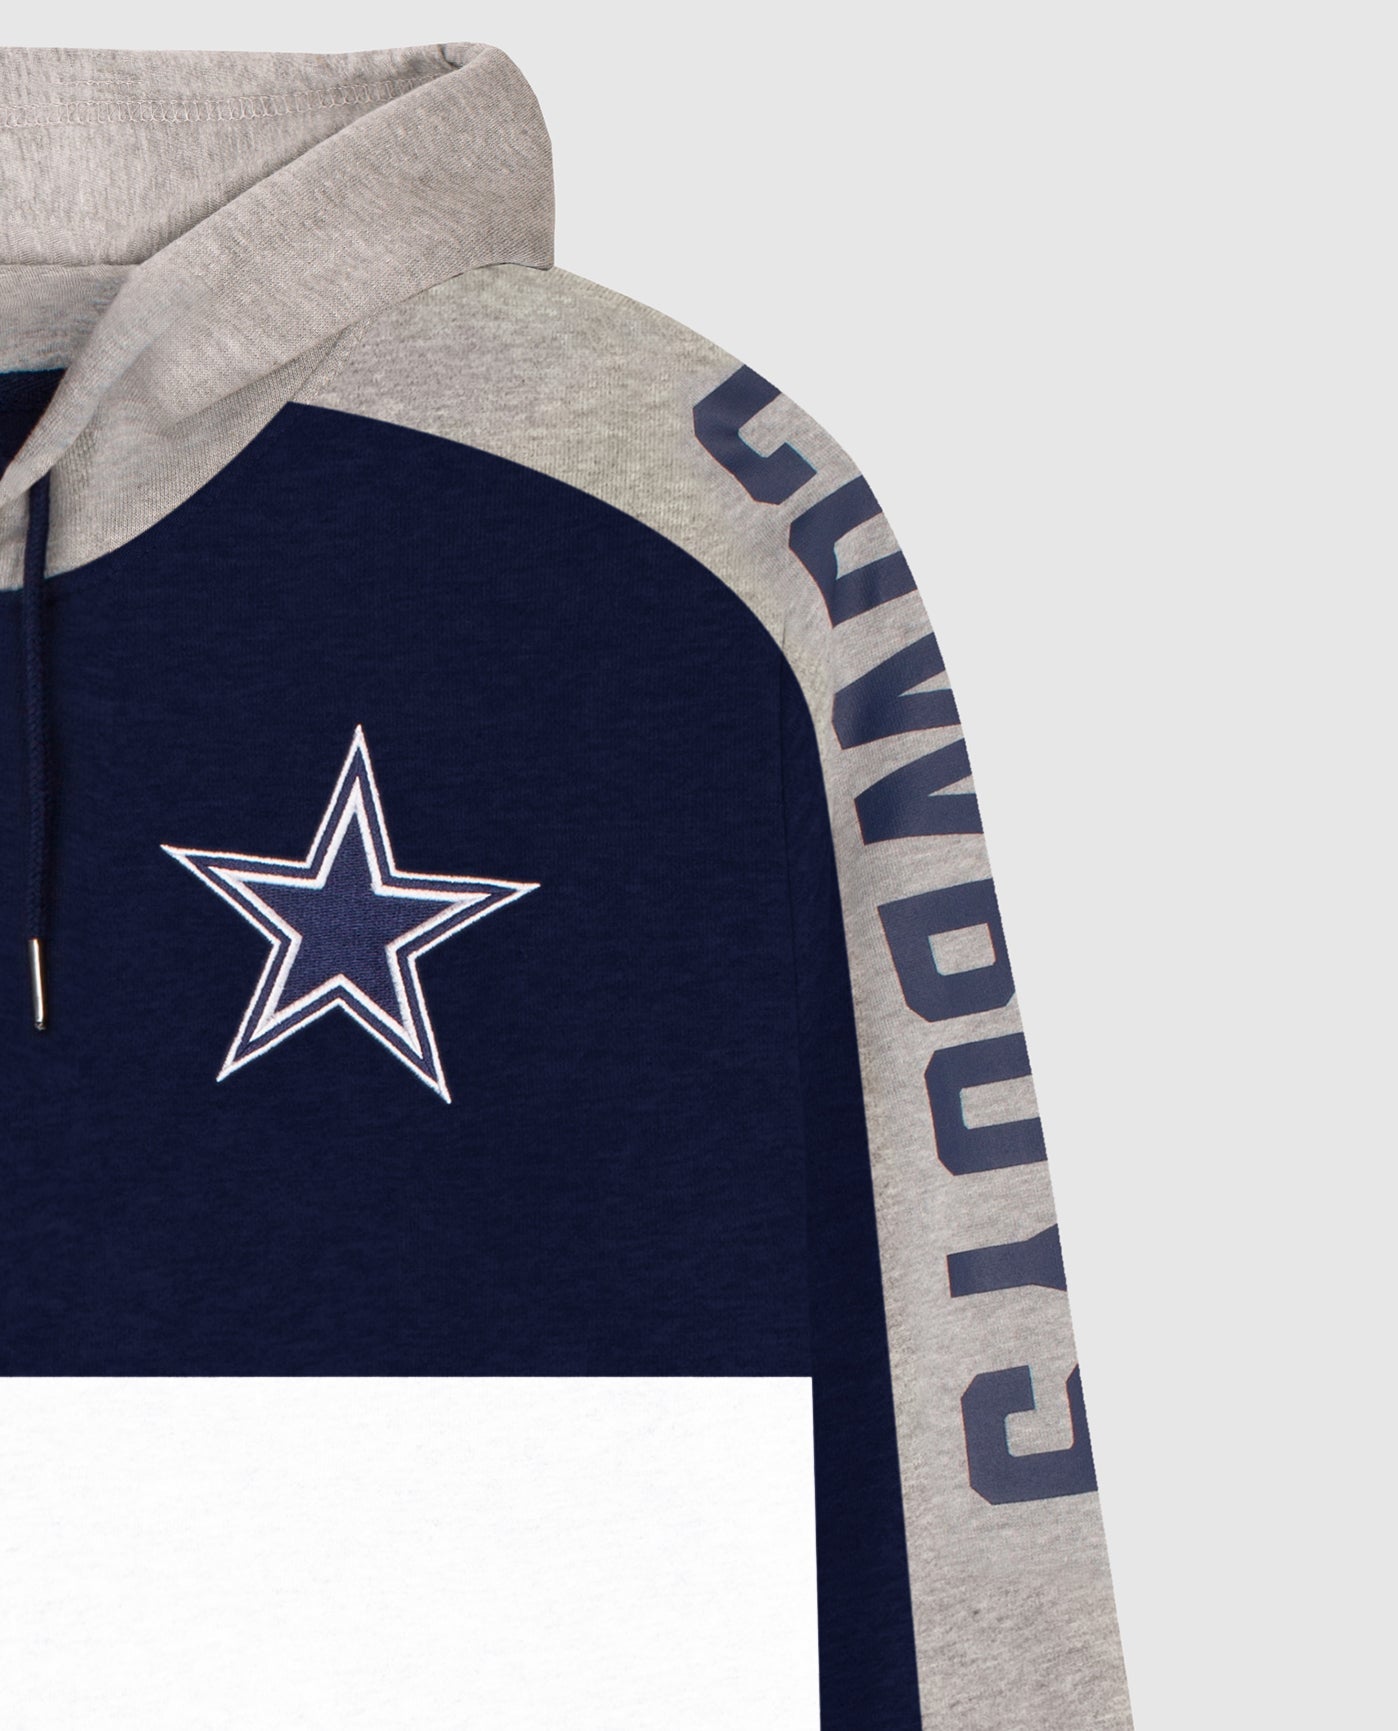 Team Logo On Chest and Team Name On Sleeve Of Dallas Cowboys Zip-Front Colorblock Hoodie | Cowboys Navy